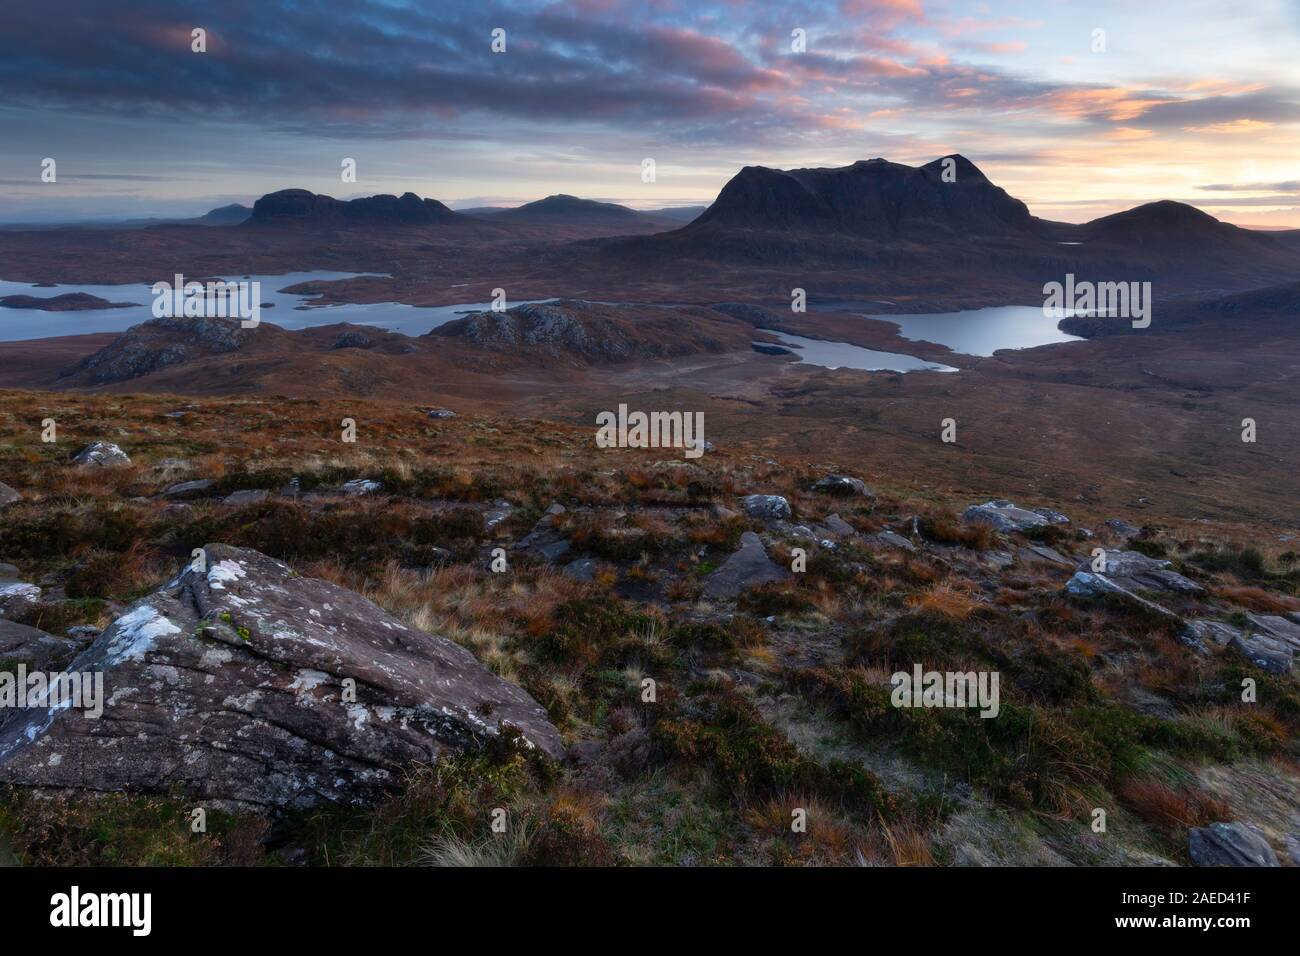 Cul Mor and Suilven mountains at dawn as seen from the slopes of Stac Pollaidh in Assynt in the Northwest Highlands of Scotland Stock Photo